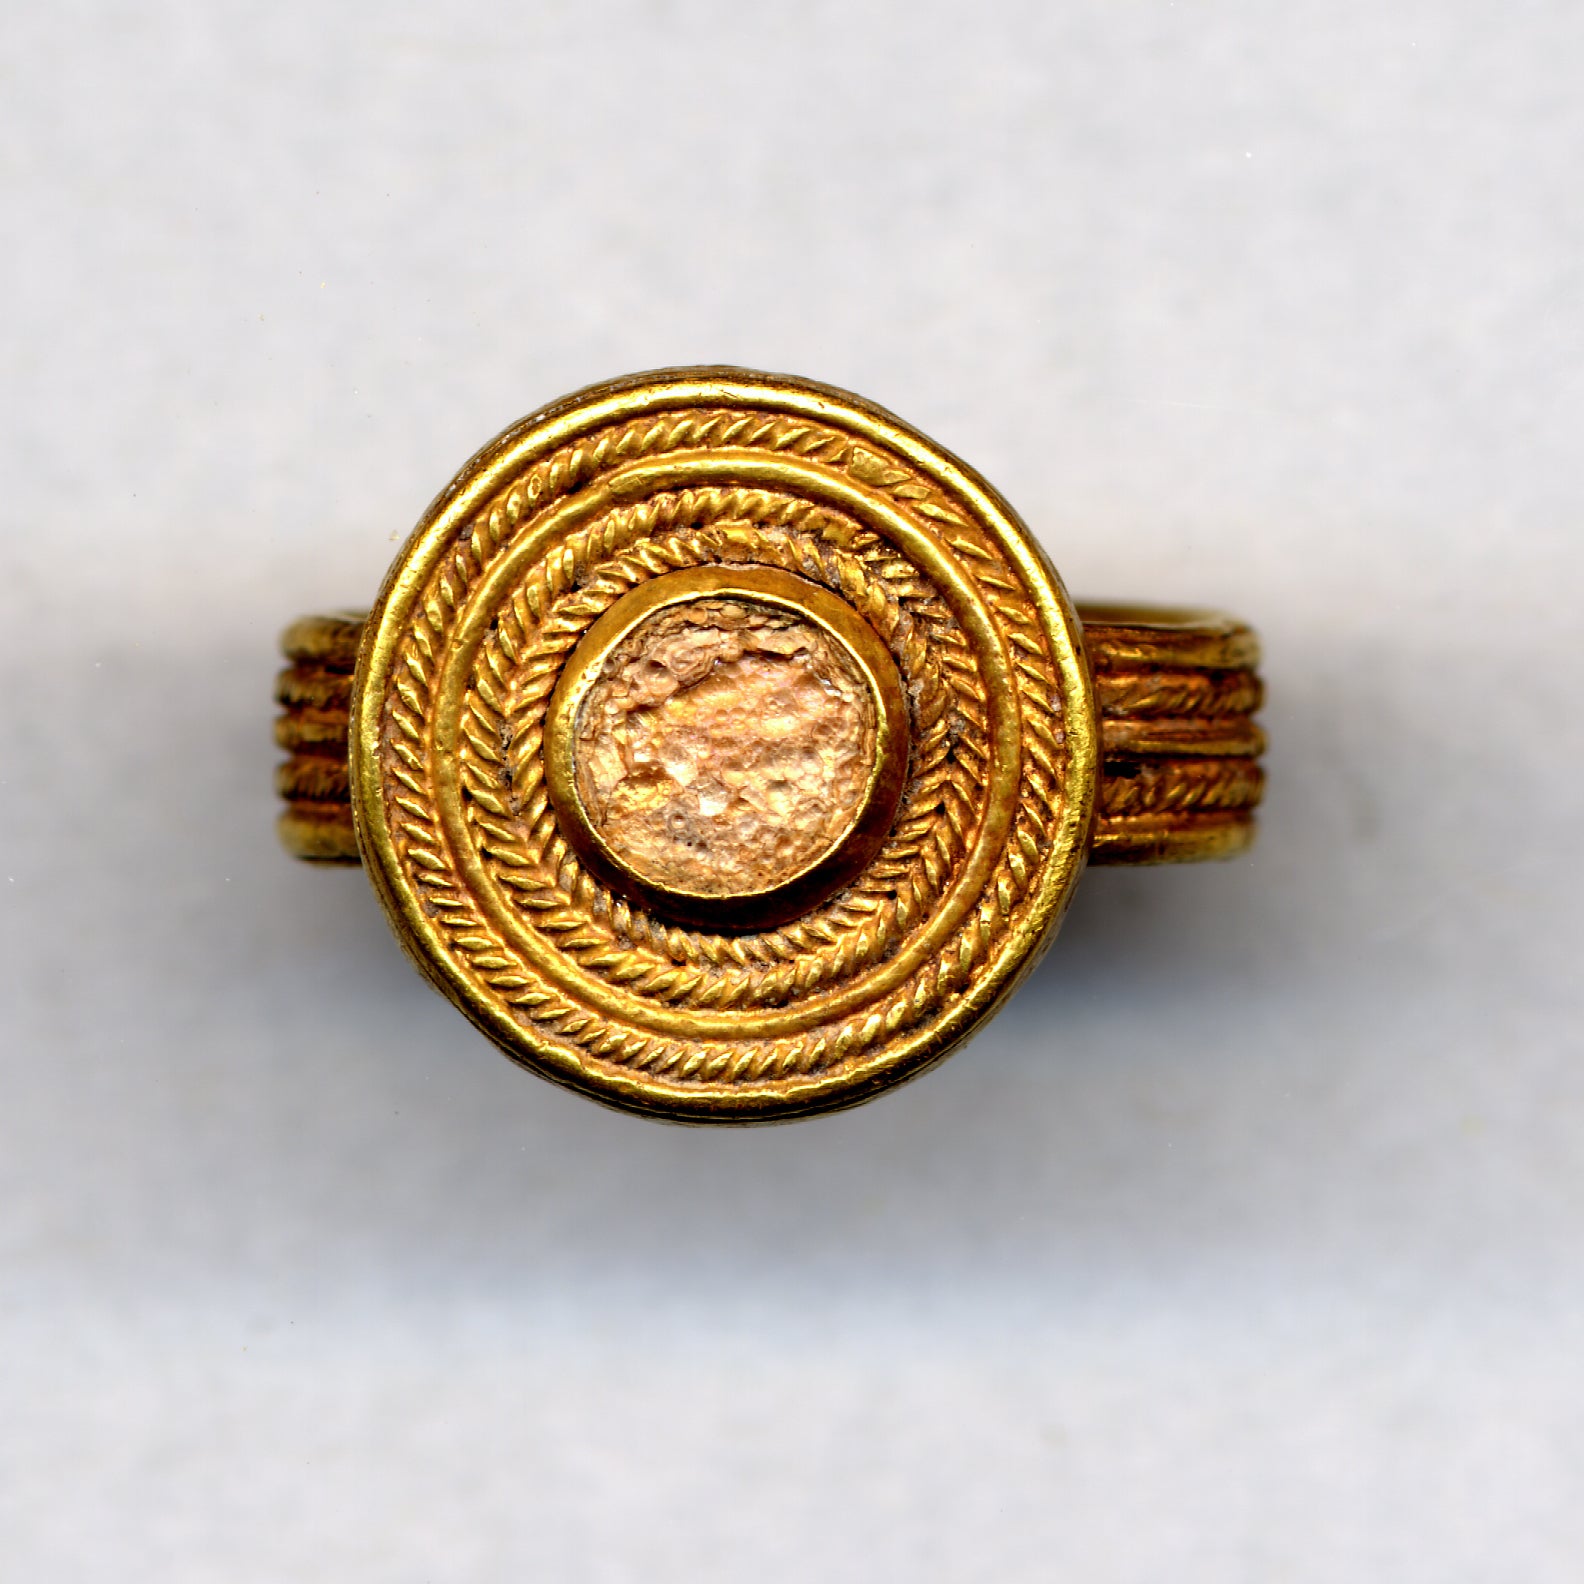 A gold finger-ring with a glass setting, similar to the items missing from the museum collections